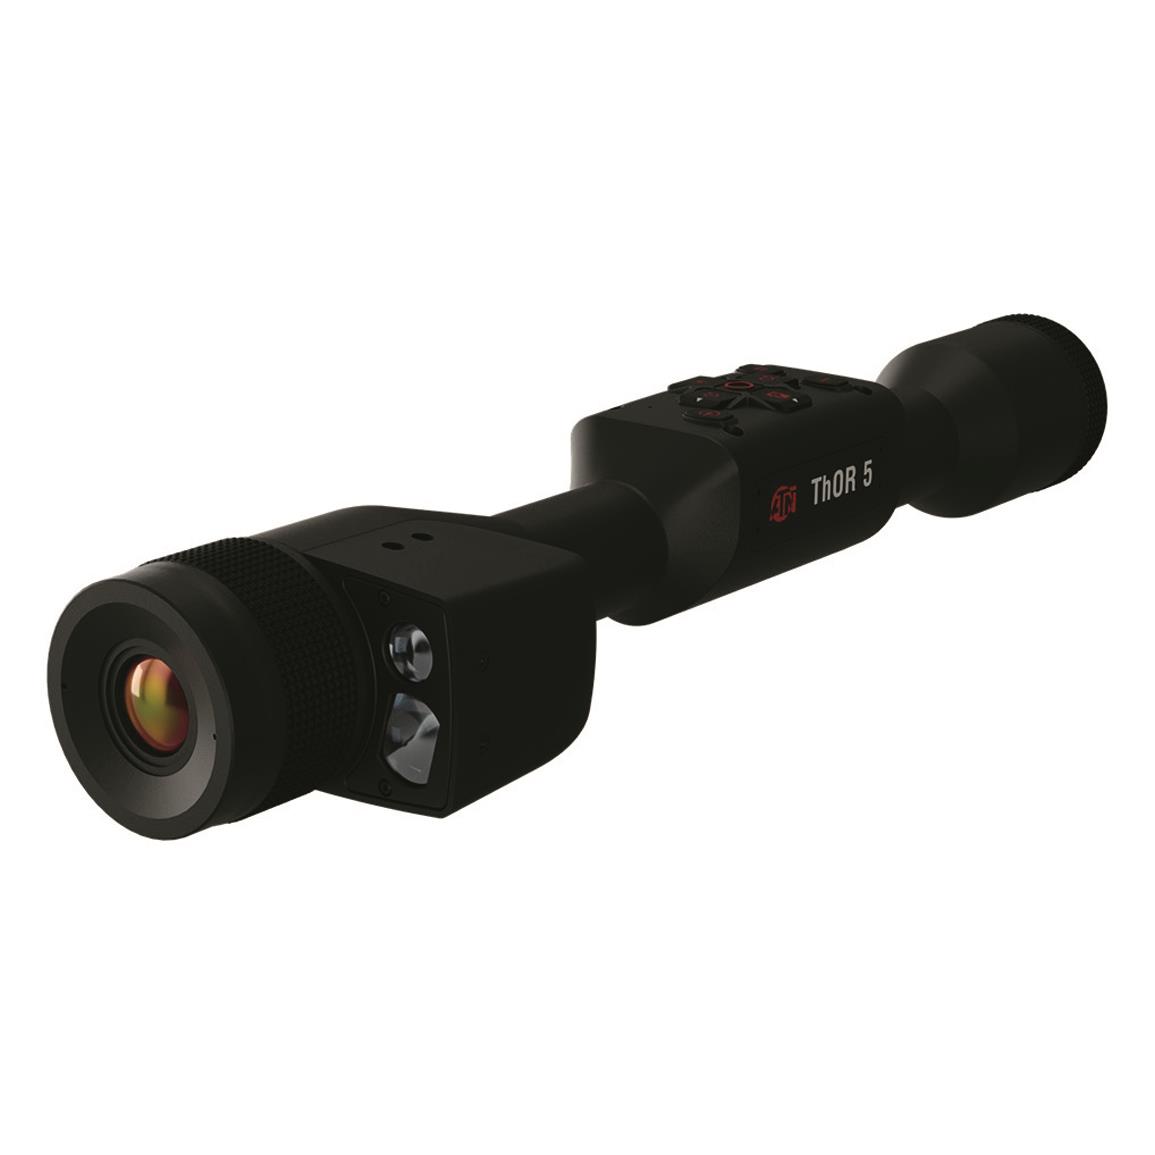 ATN ThOR 5 LRF 320x240 4 16x Smart HD Thermal Rifle Scope With